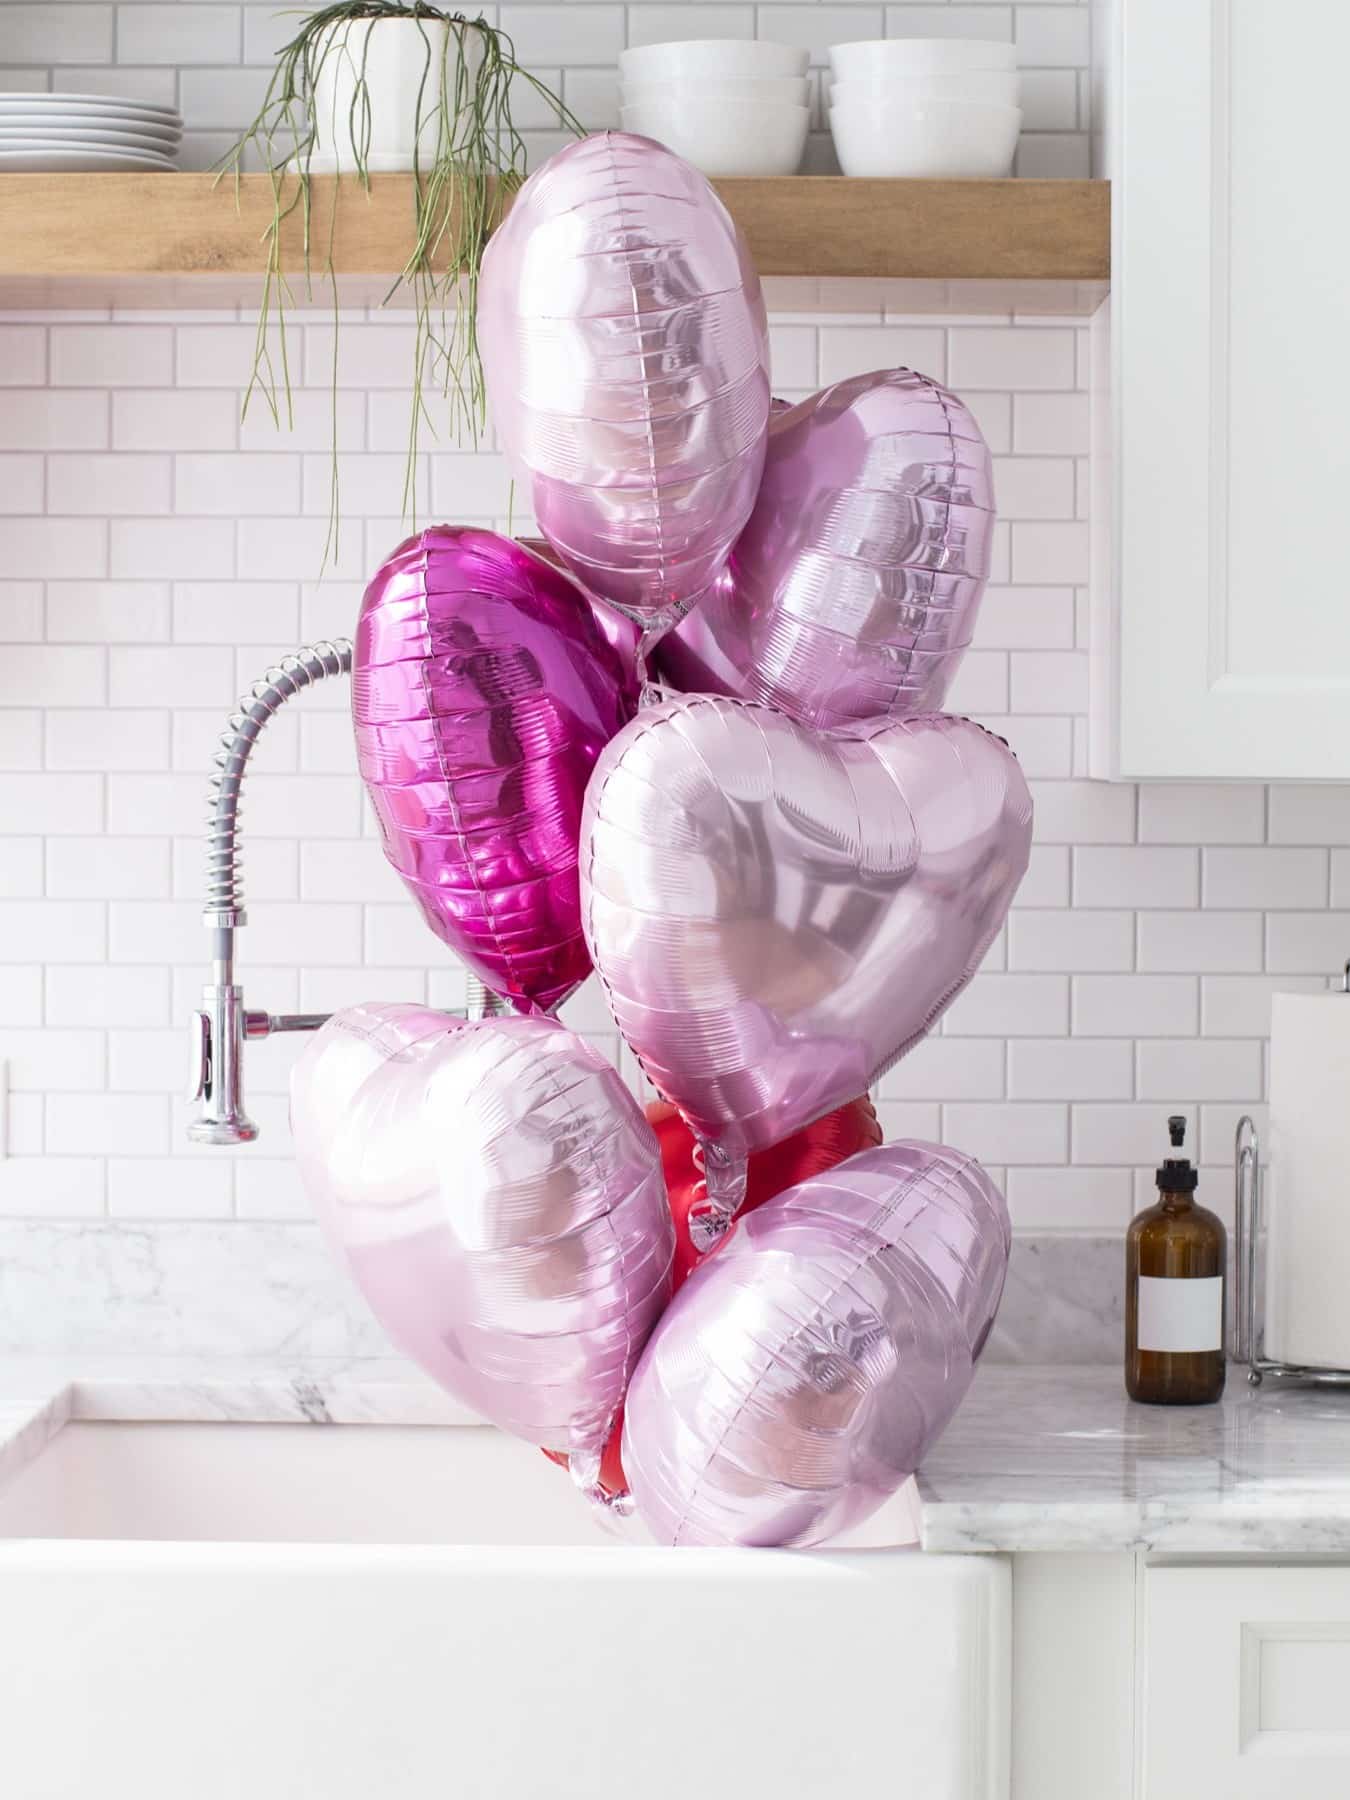 Discover 25 Unique Gifts to Show Love this Valentine’s Day